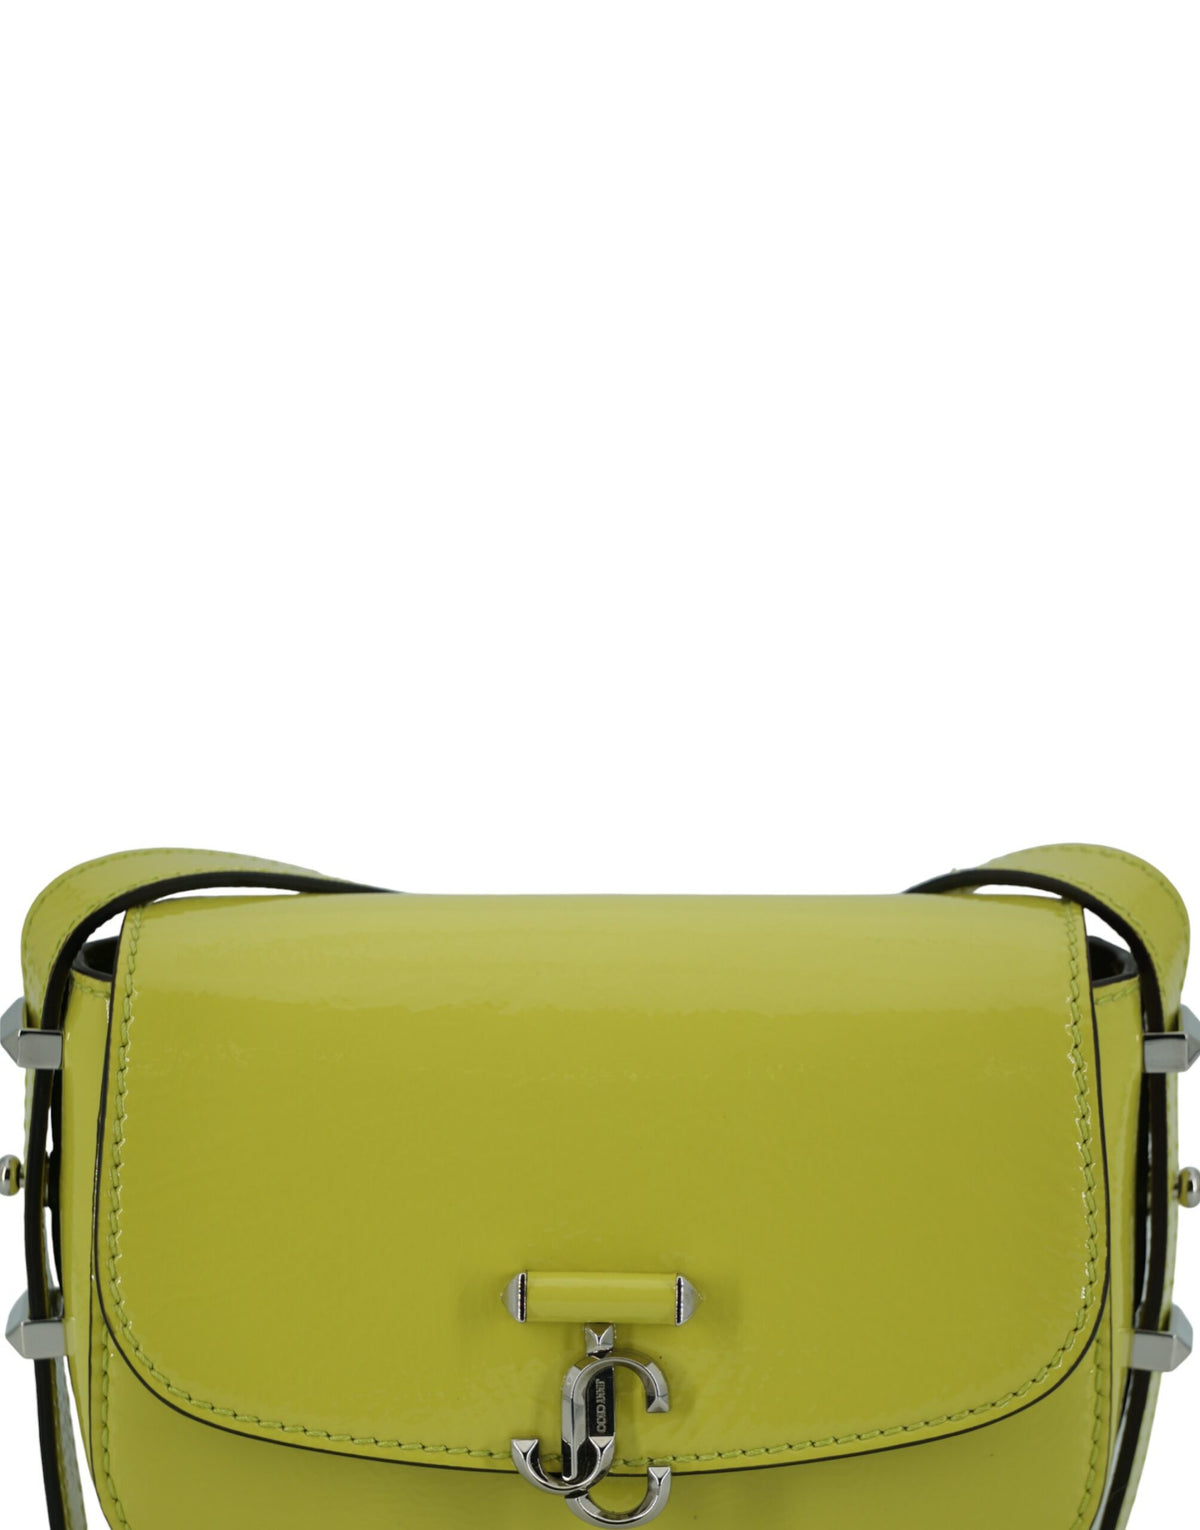 Jimmy Choo Lime Yellow Leather Small Shoulder Bag